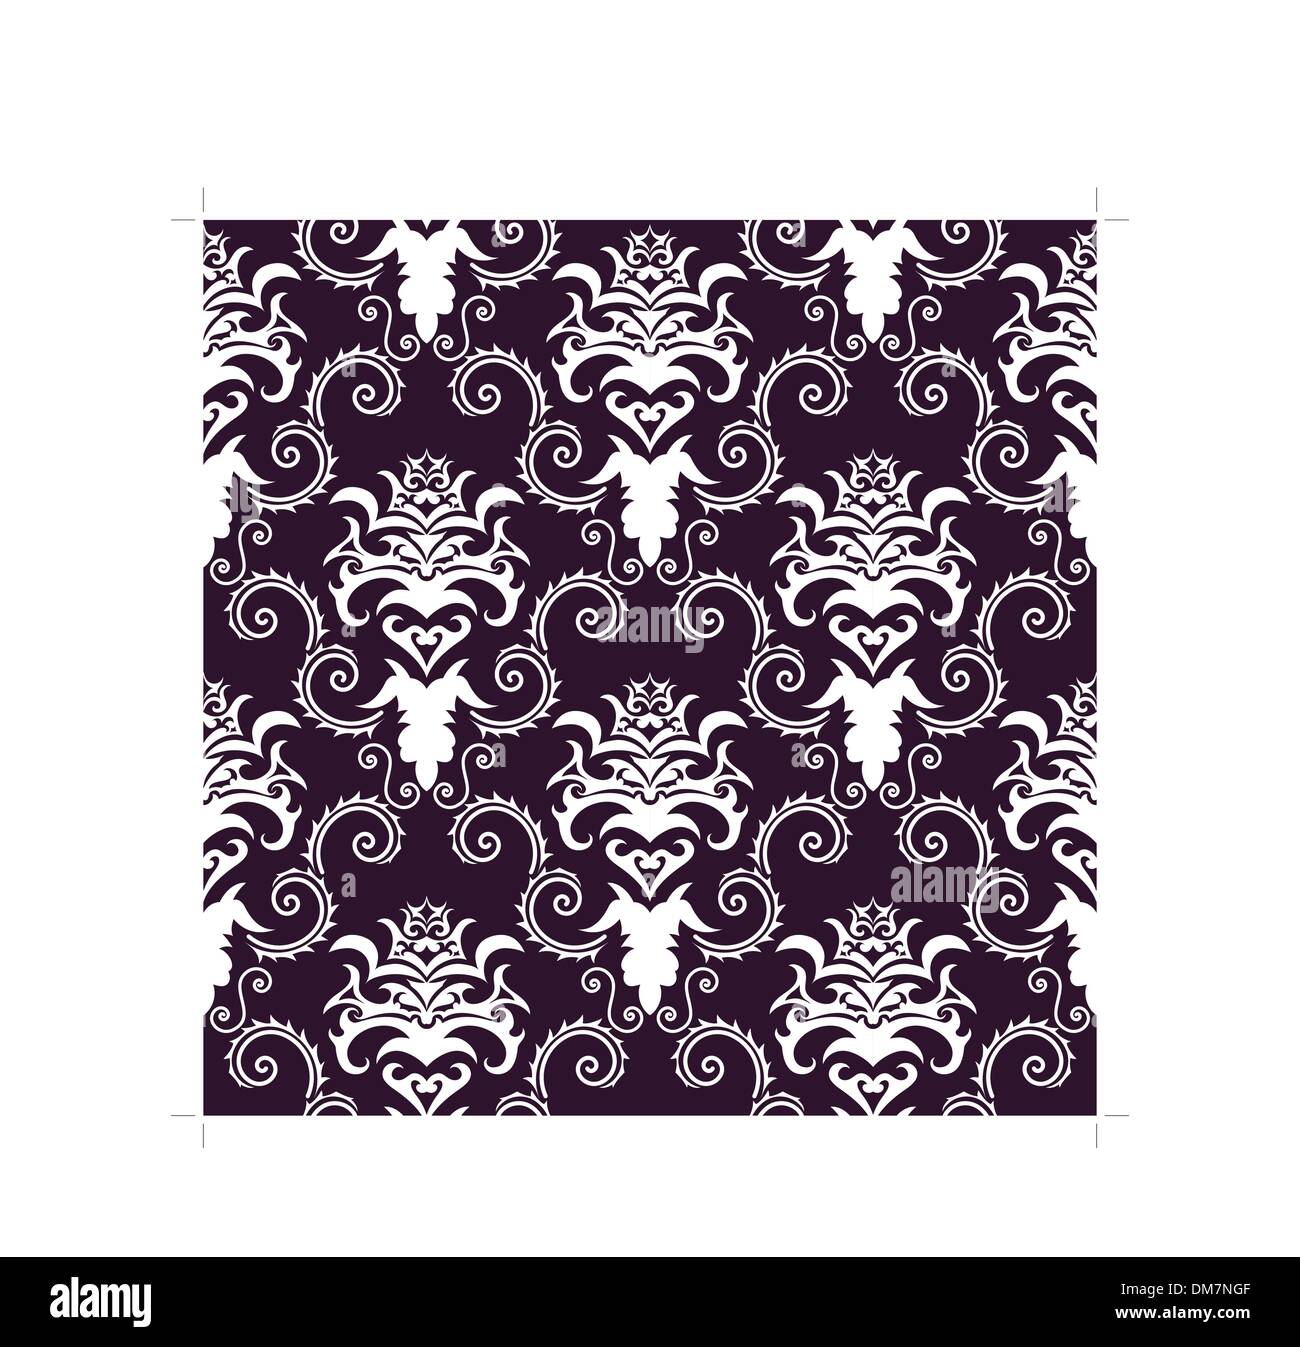 Damask fabric Cut Out Stock Images & Pictures - Alamy